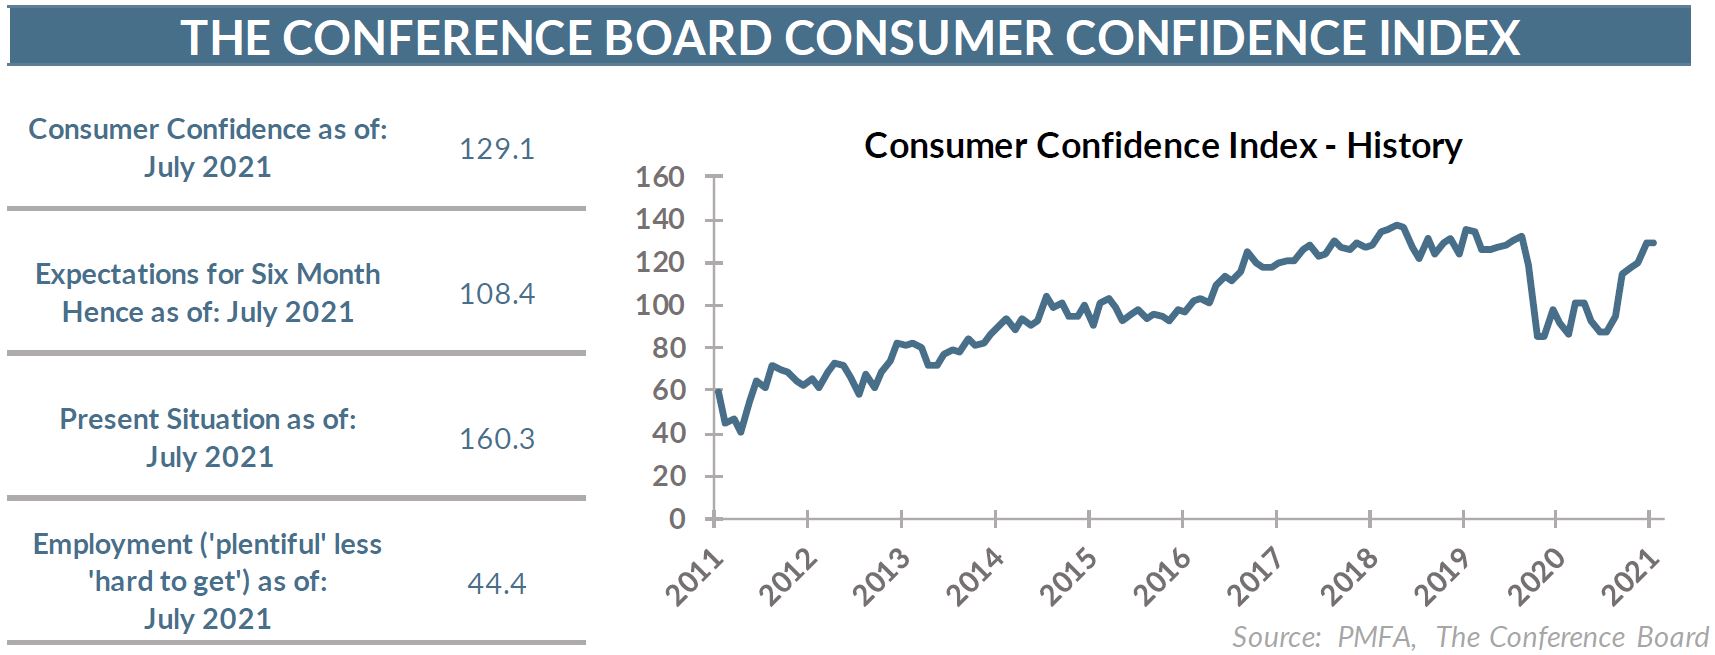 Consumer Confidence Index - History Chart